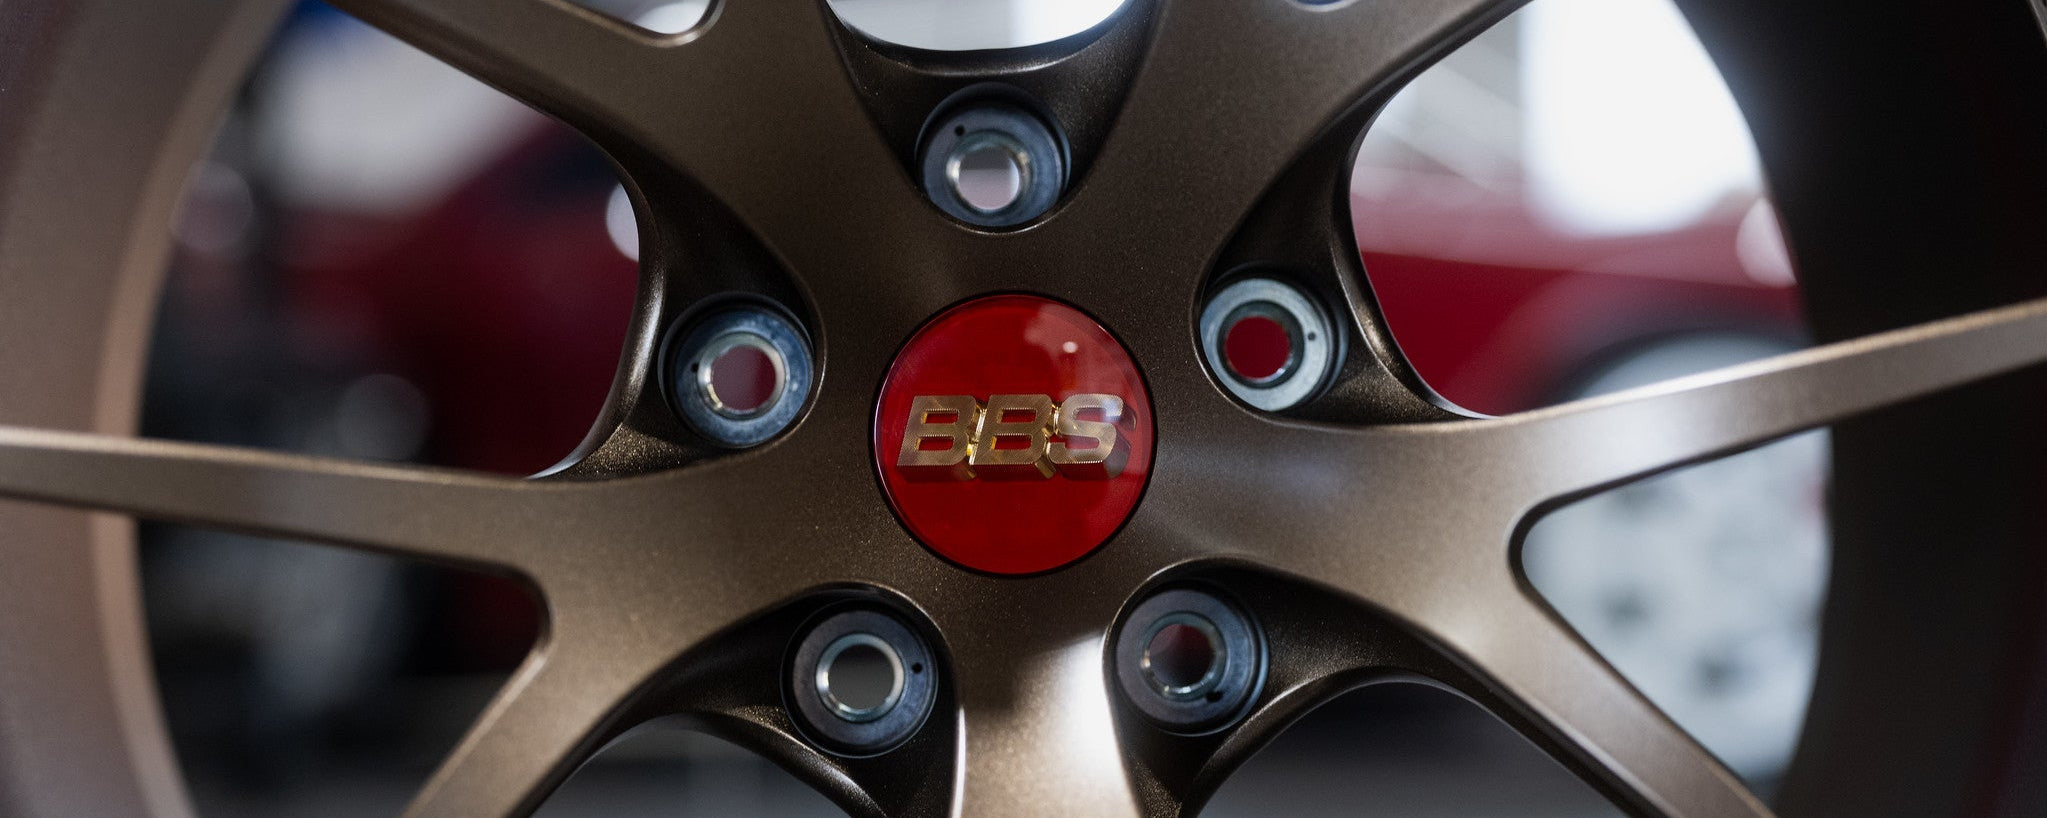 BBS RI-A for NISSAN Z - Premium Wheels from BBS Japan - From just $4890.0! Shop now at MK MOTORSPORTS